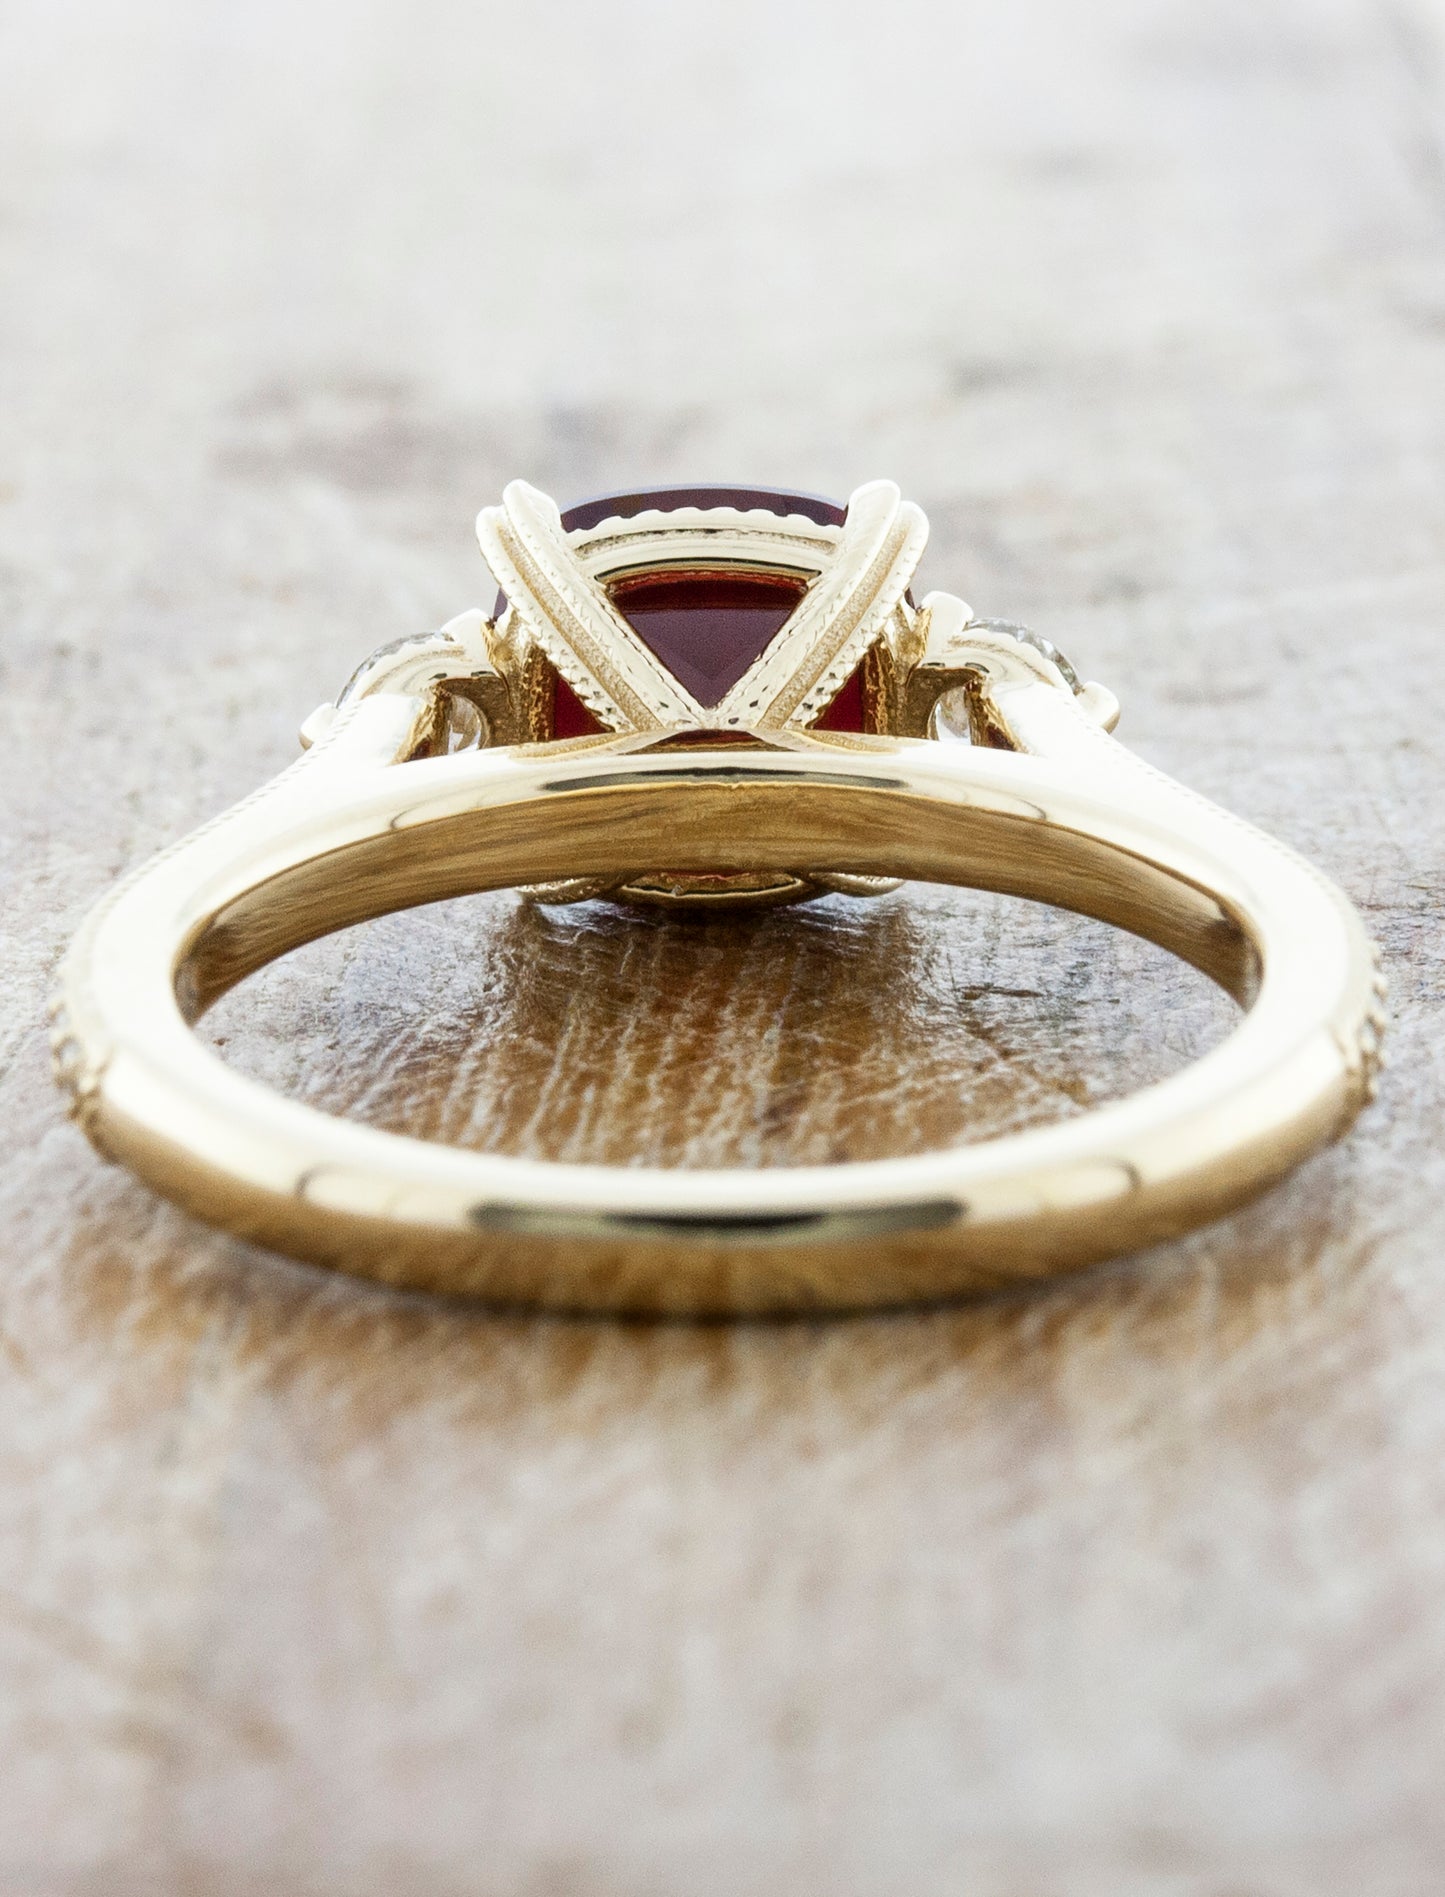 Three-Stone Ruby Ring with Pave - Intricate Basket